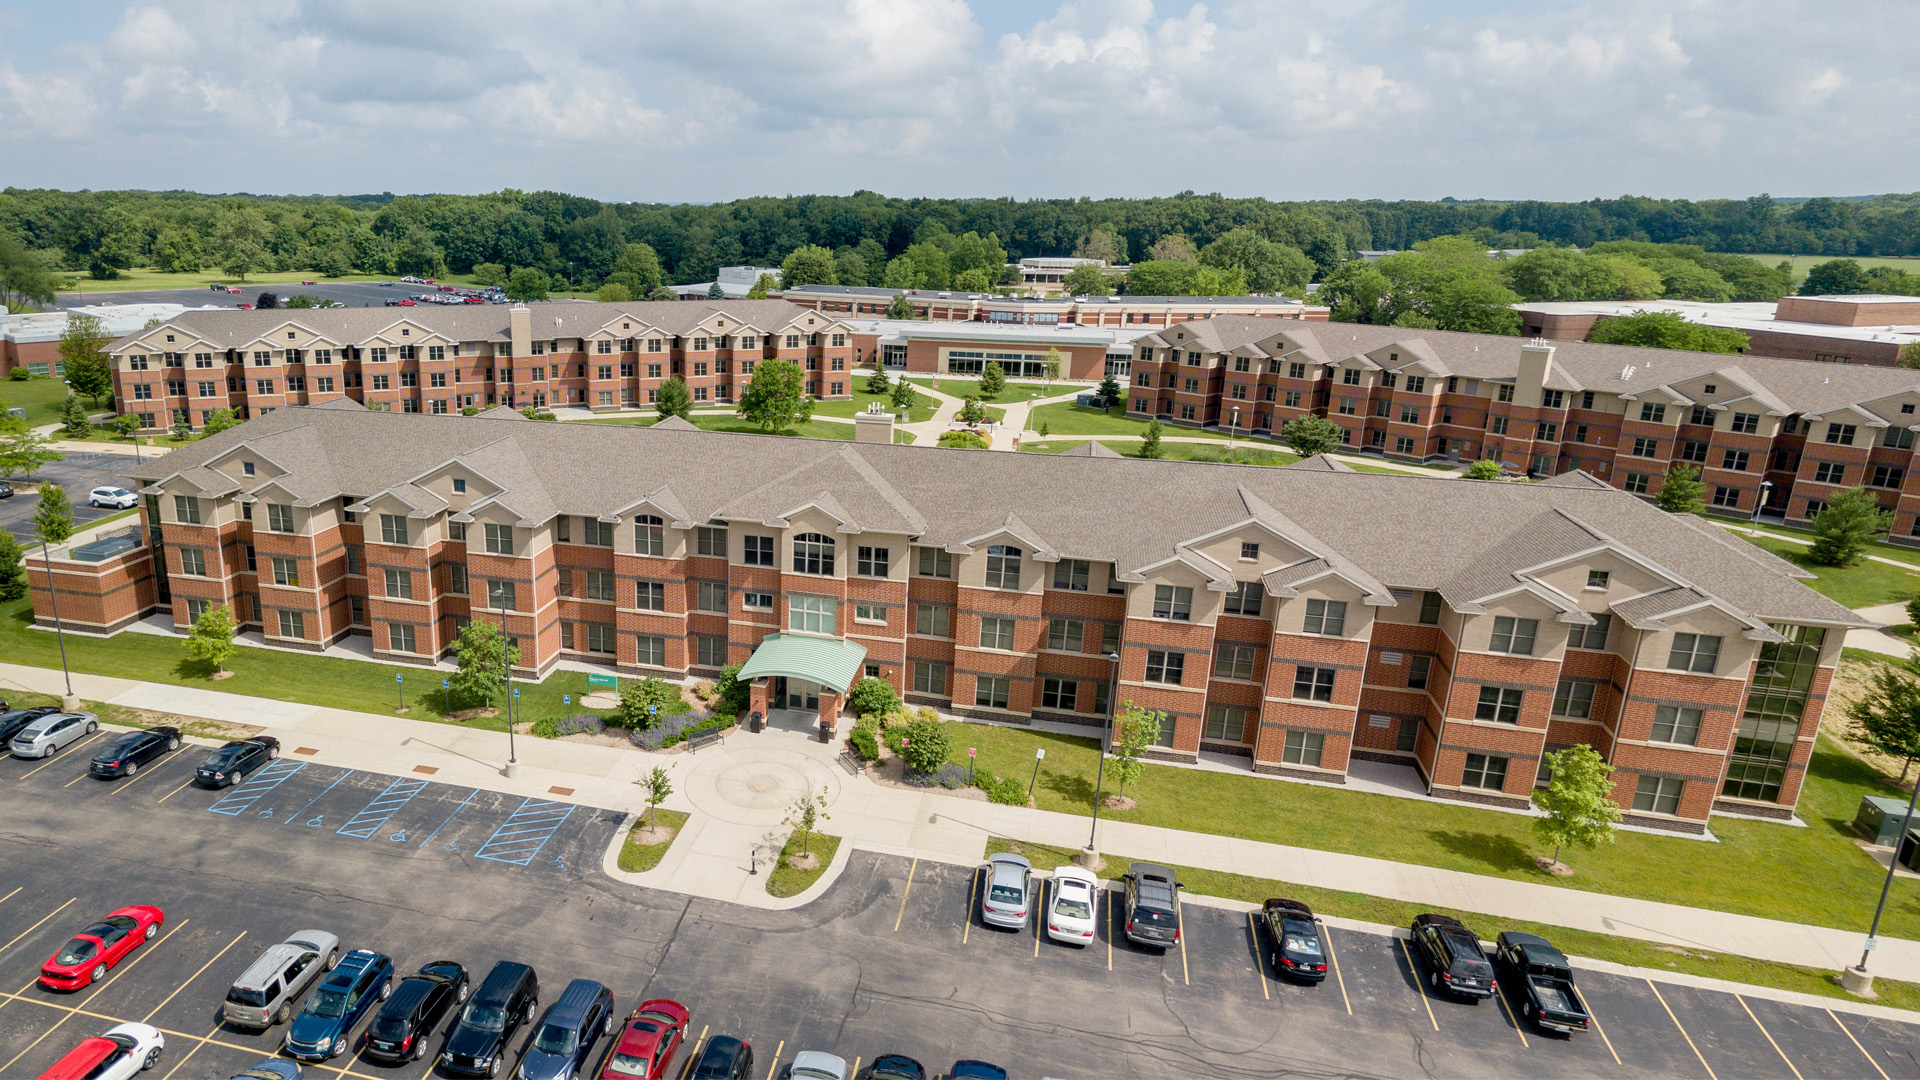 Aerial Photo of Residence Halls on the Dowagiac campus